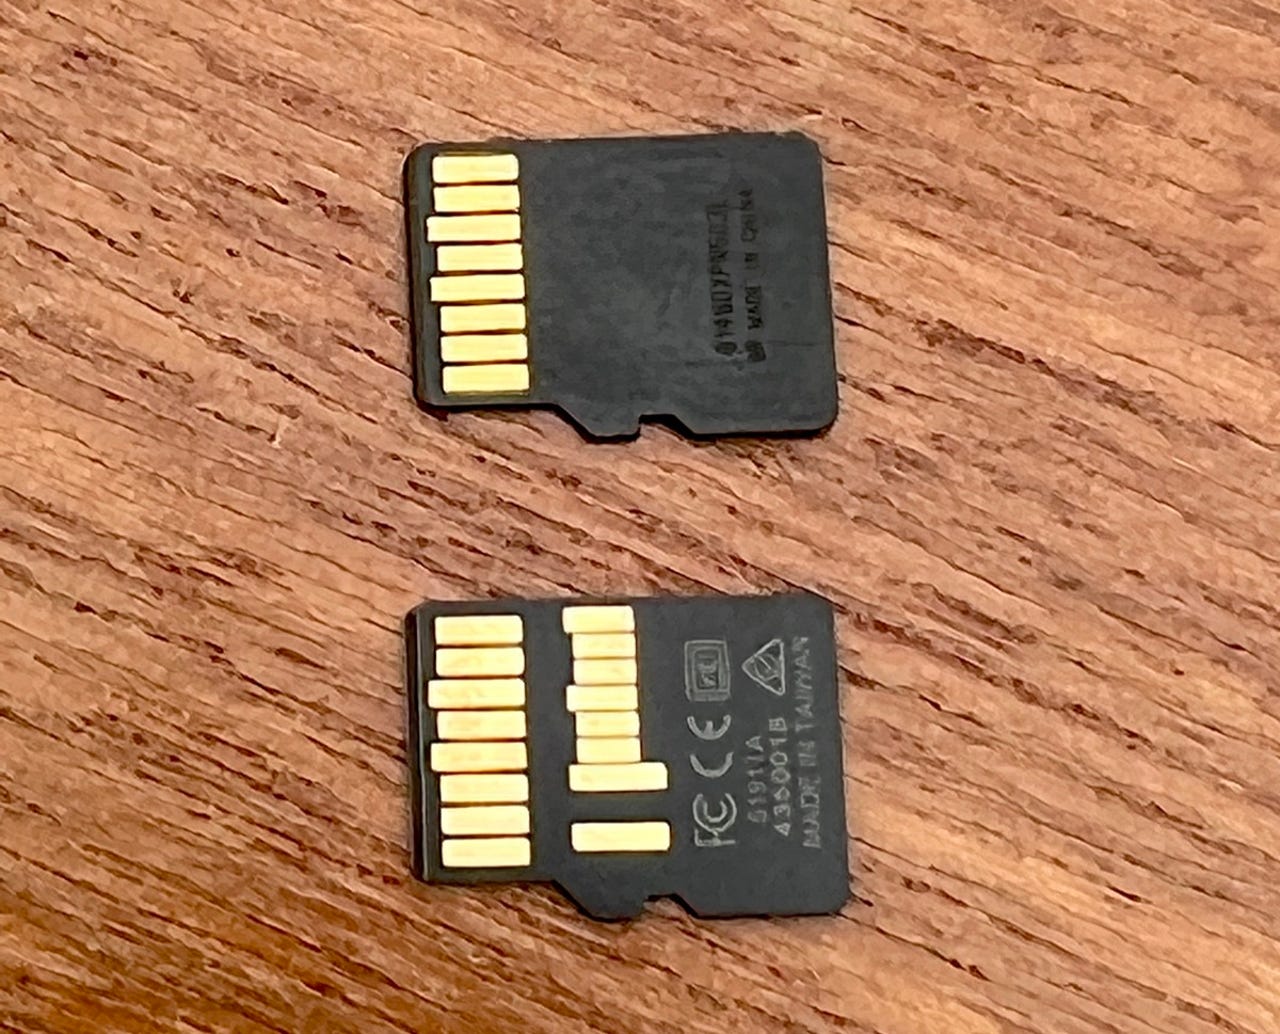 What the symbols on an SD card mean